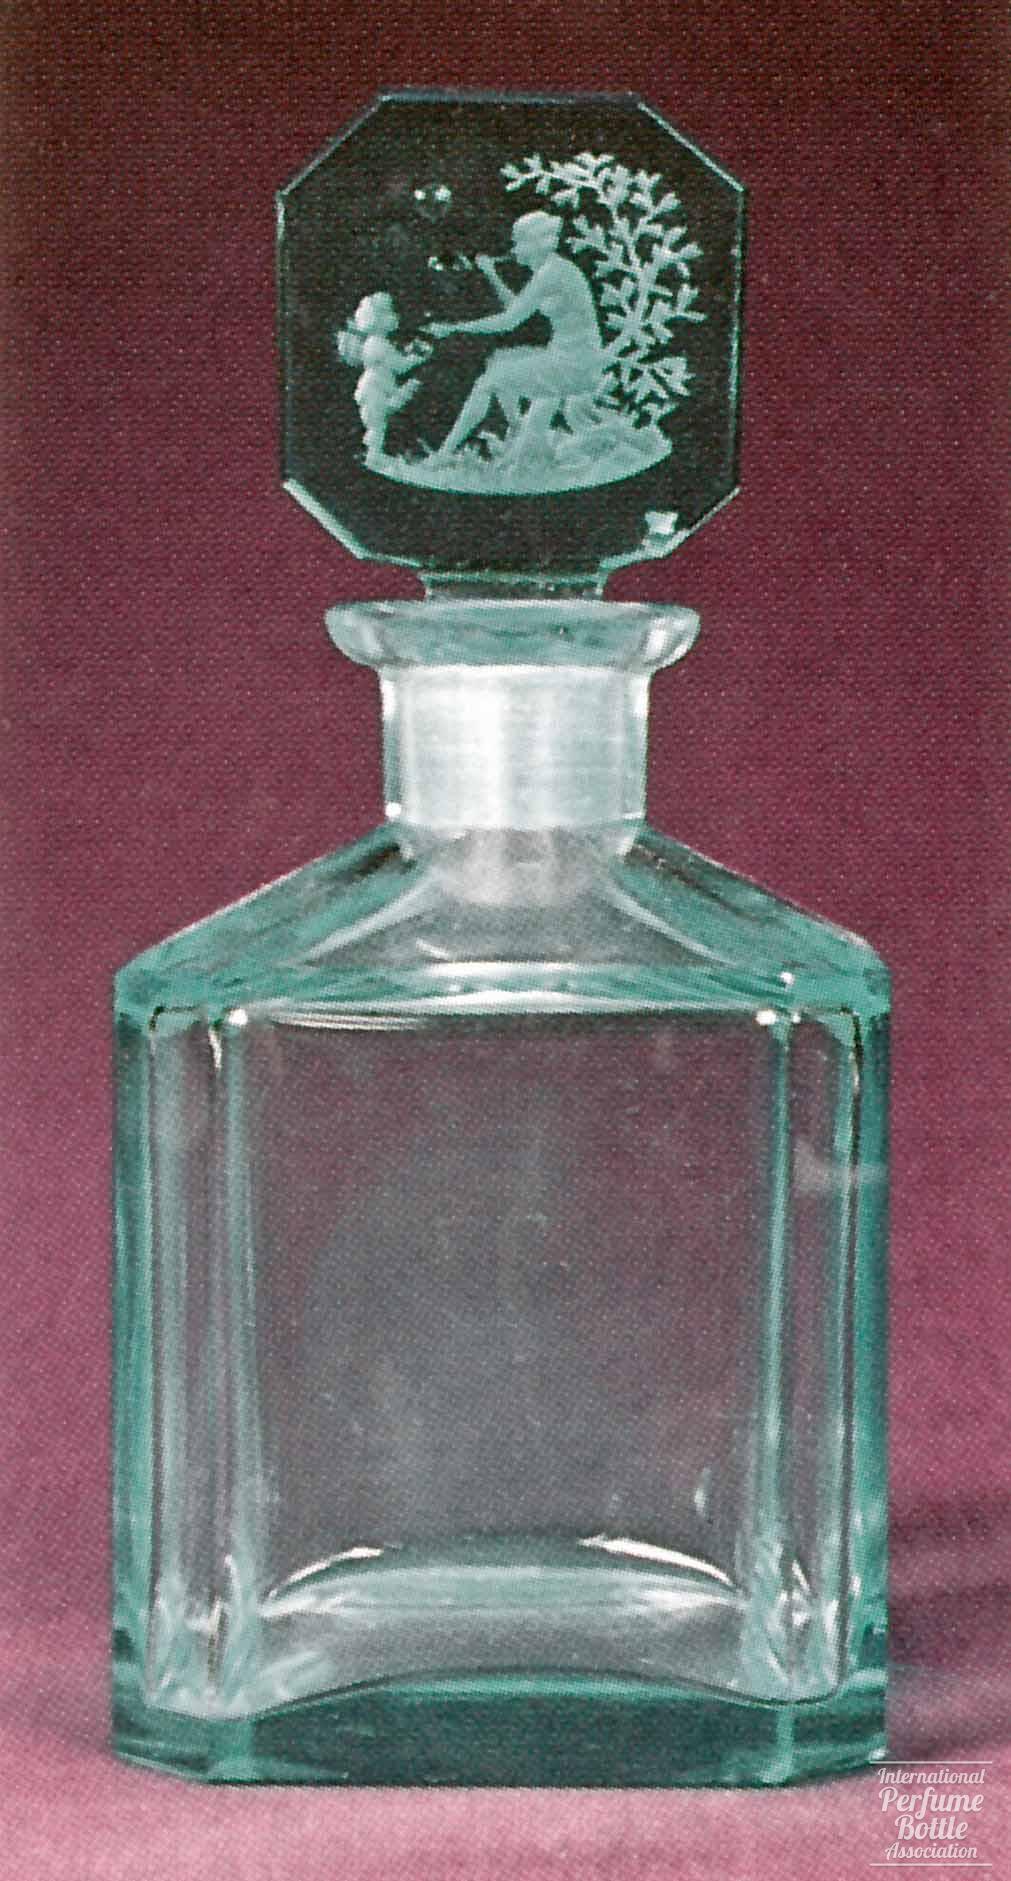 Aqua Bottle With Cupid and Venus Blowing Bubbles by Hoffmann